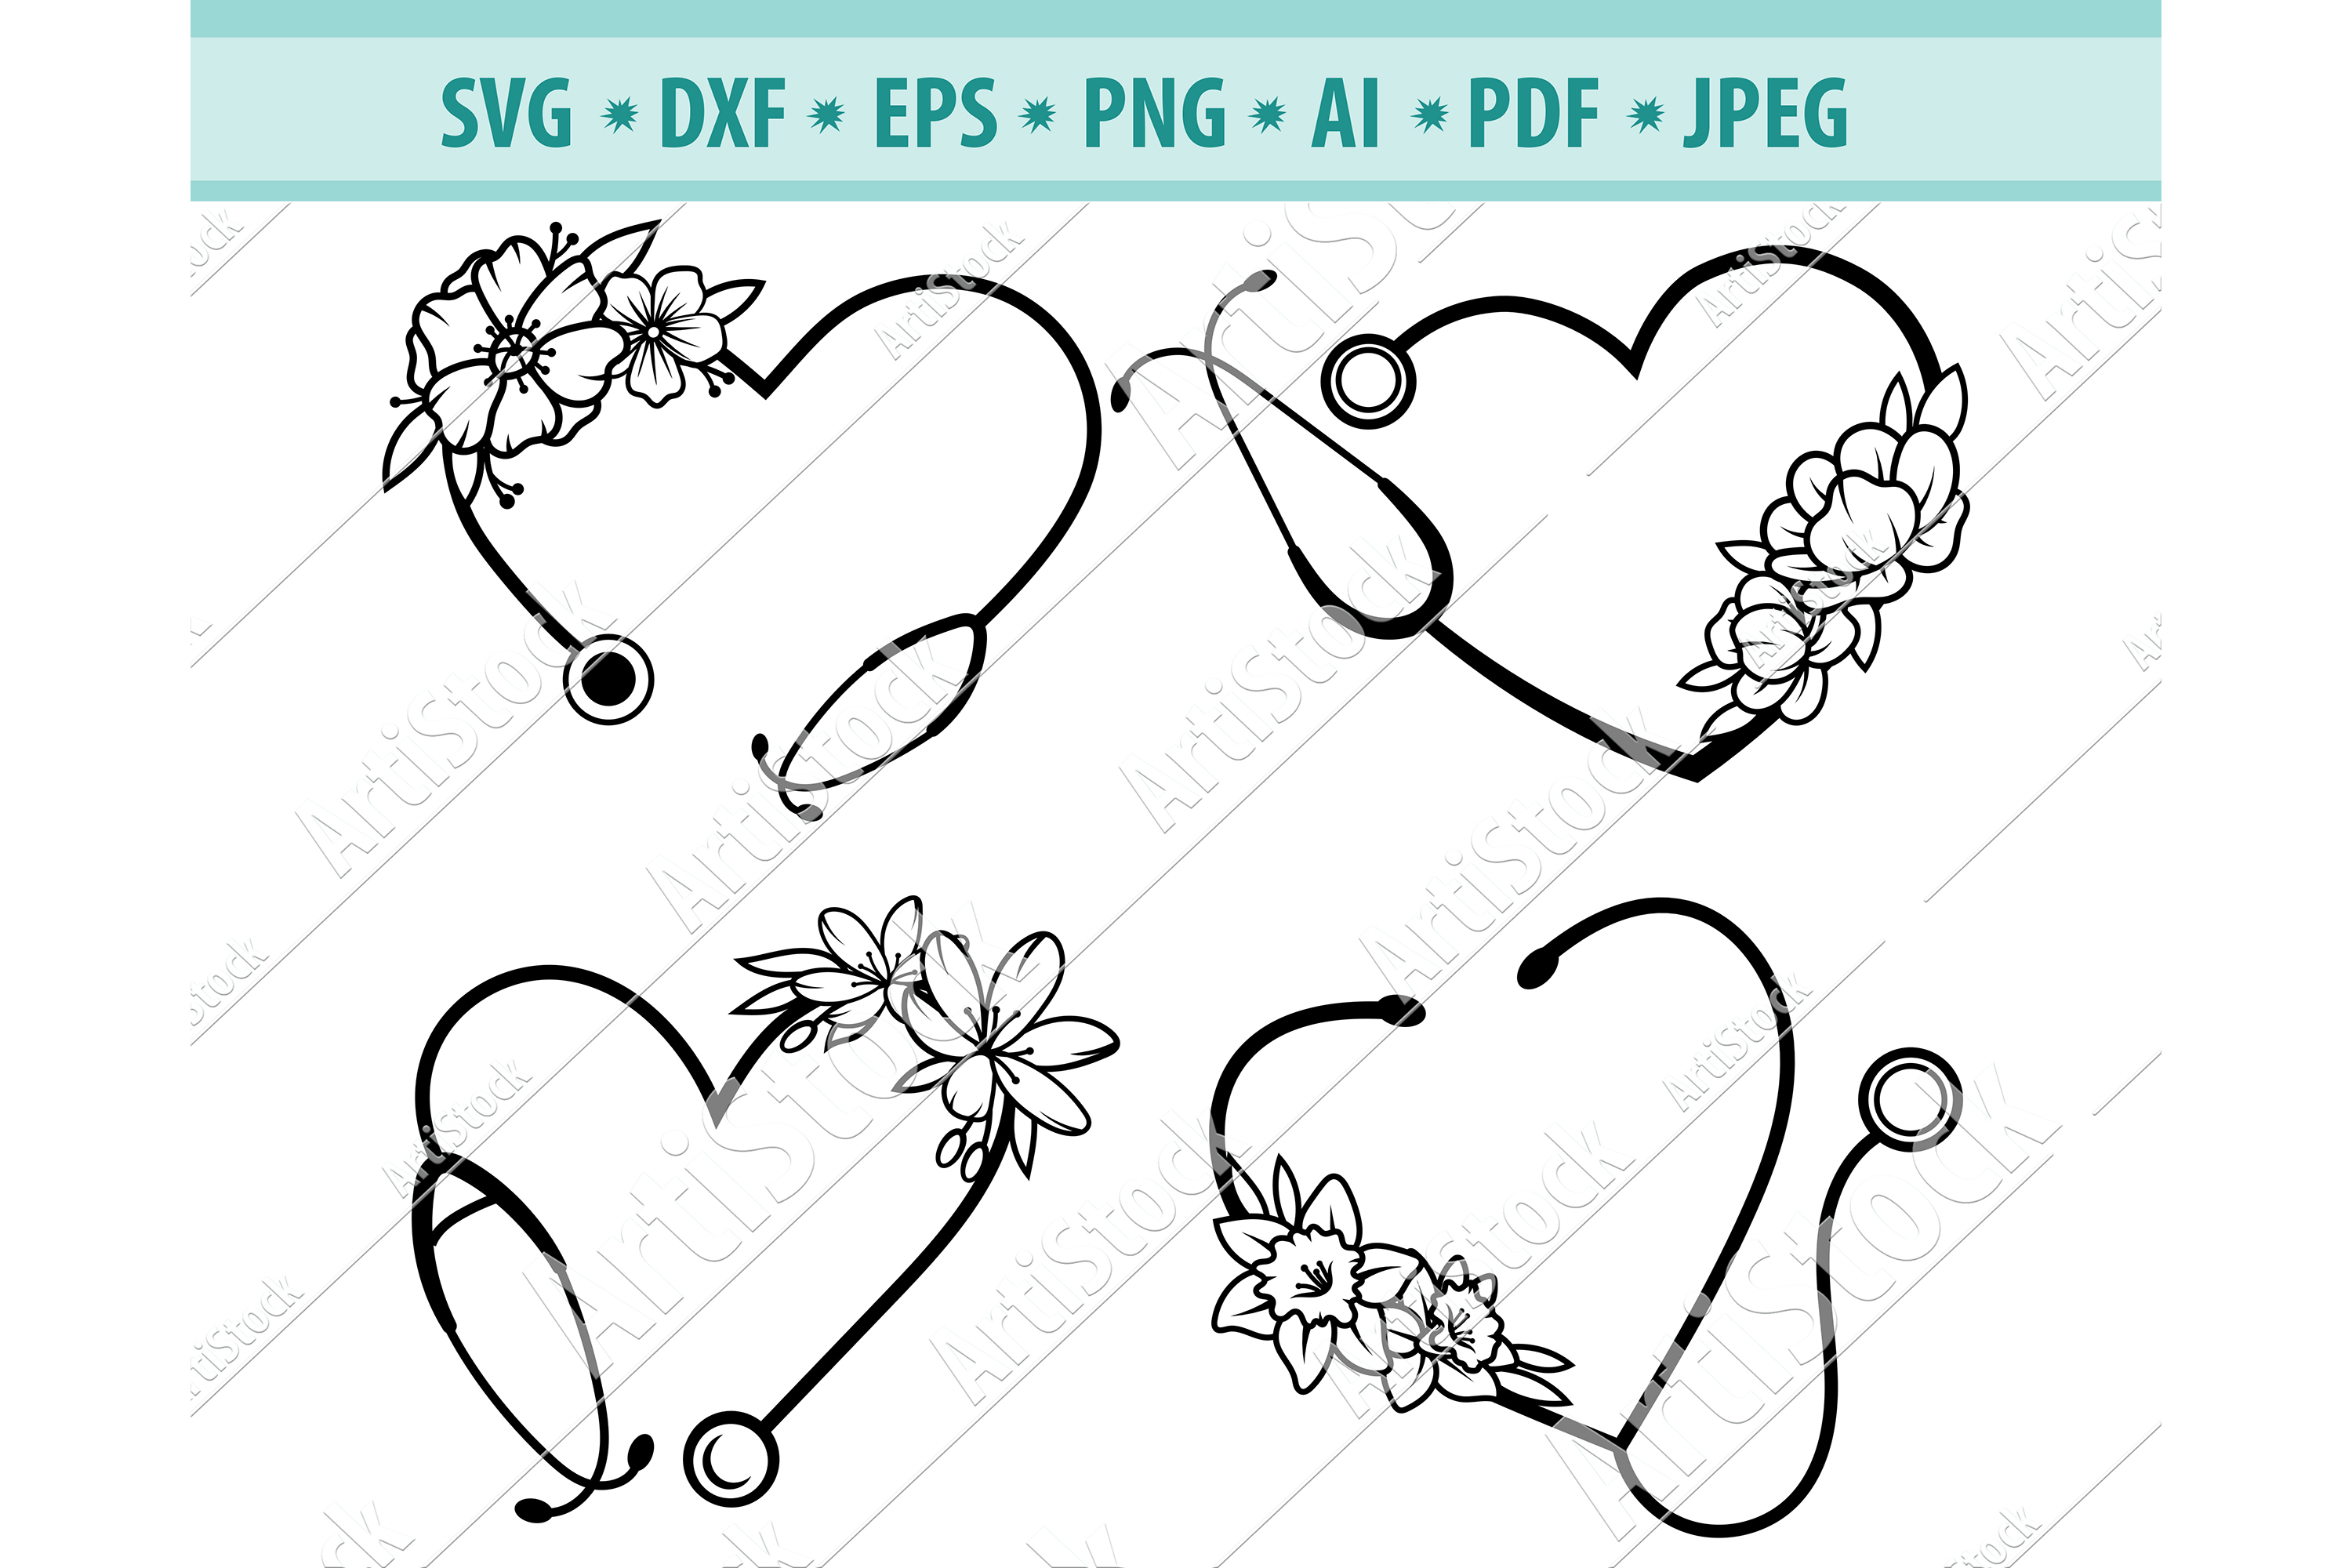 Download Heart Stethoscope with flowers SVG, Stethoscope Dxf, Eps